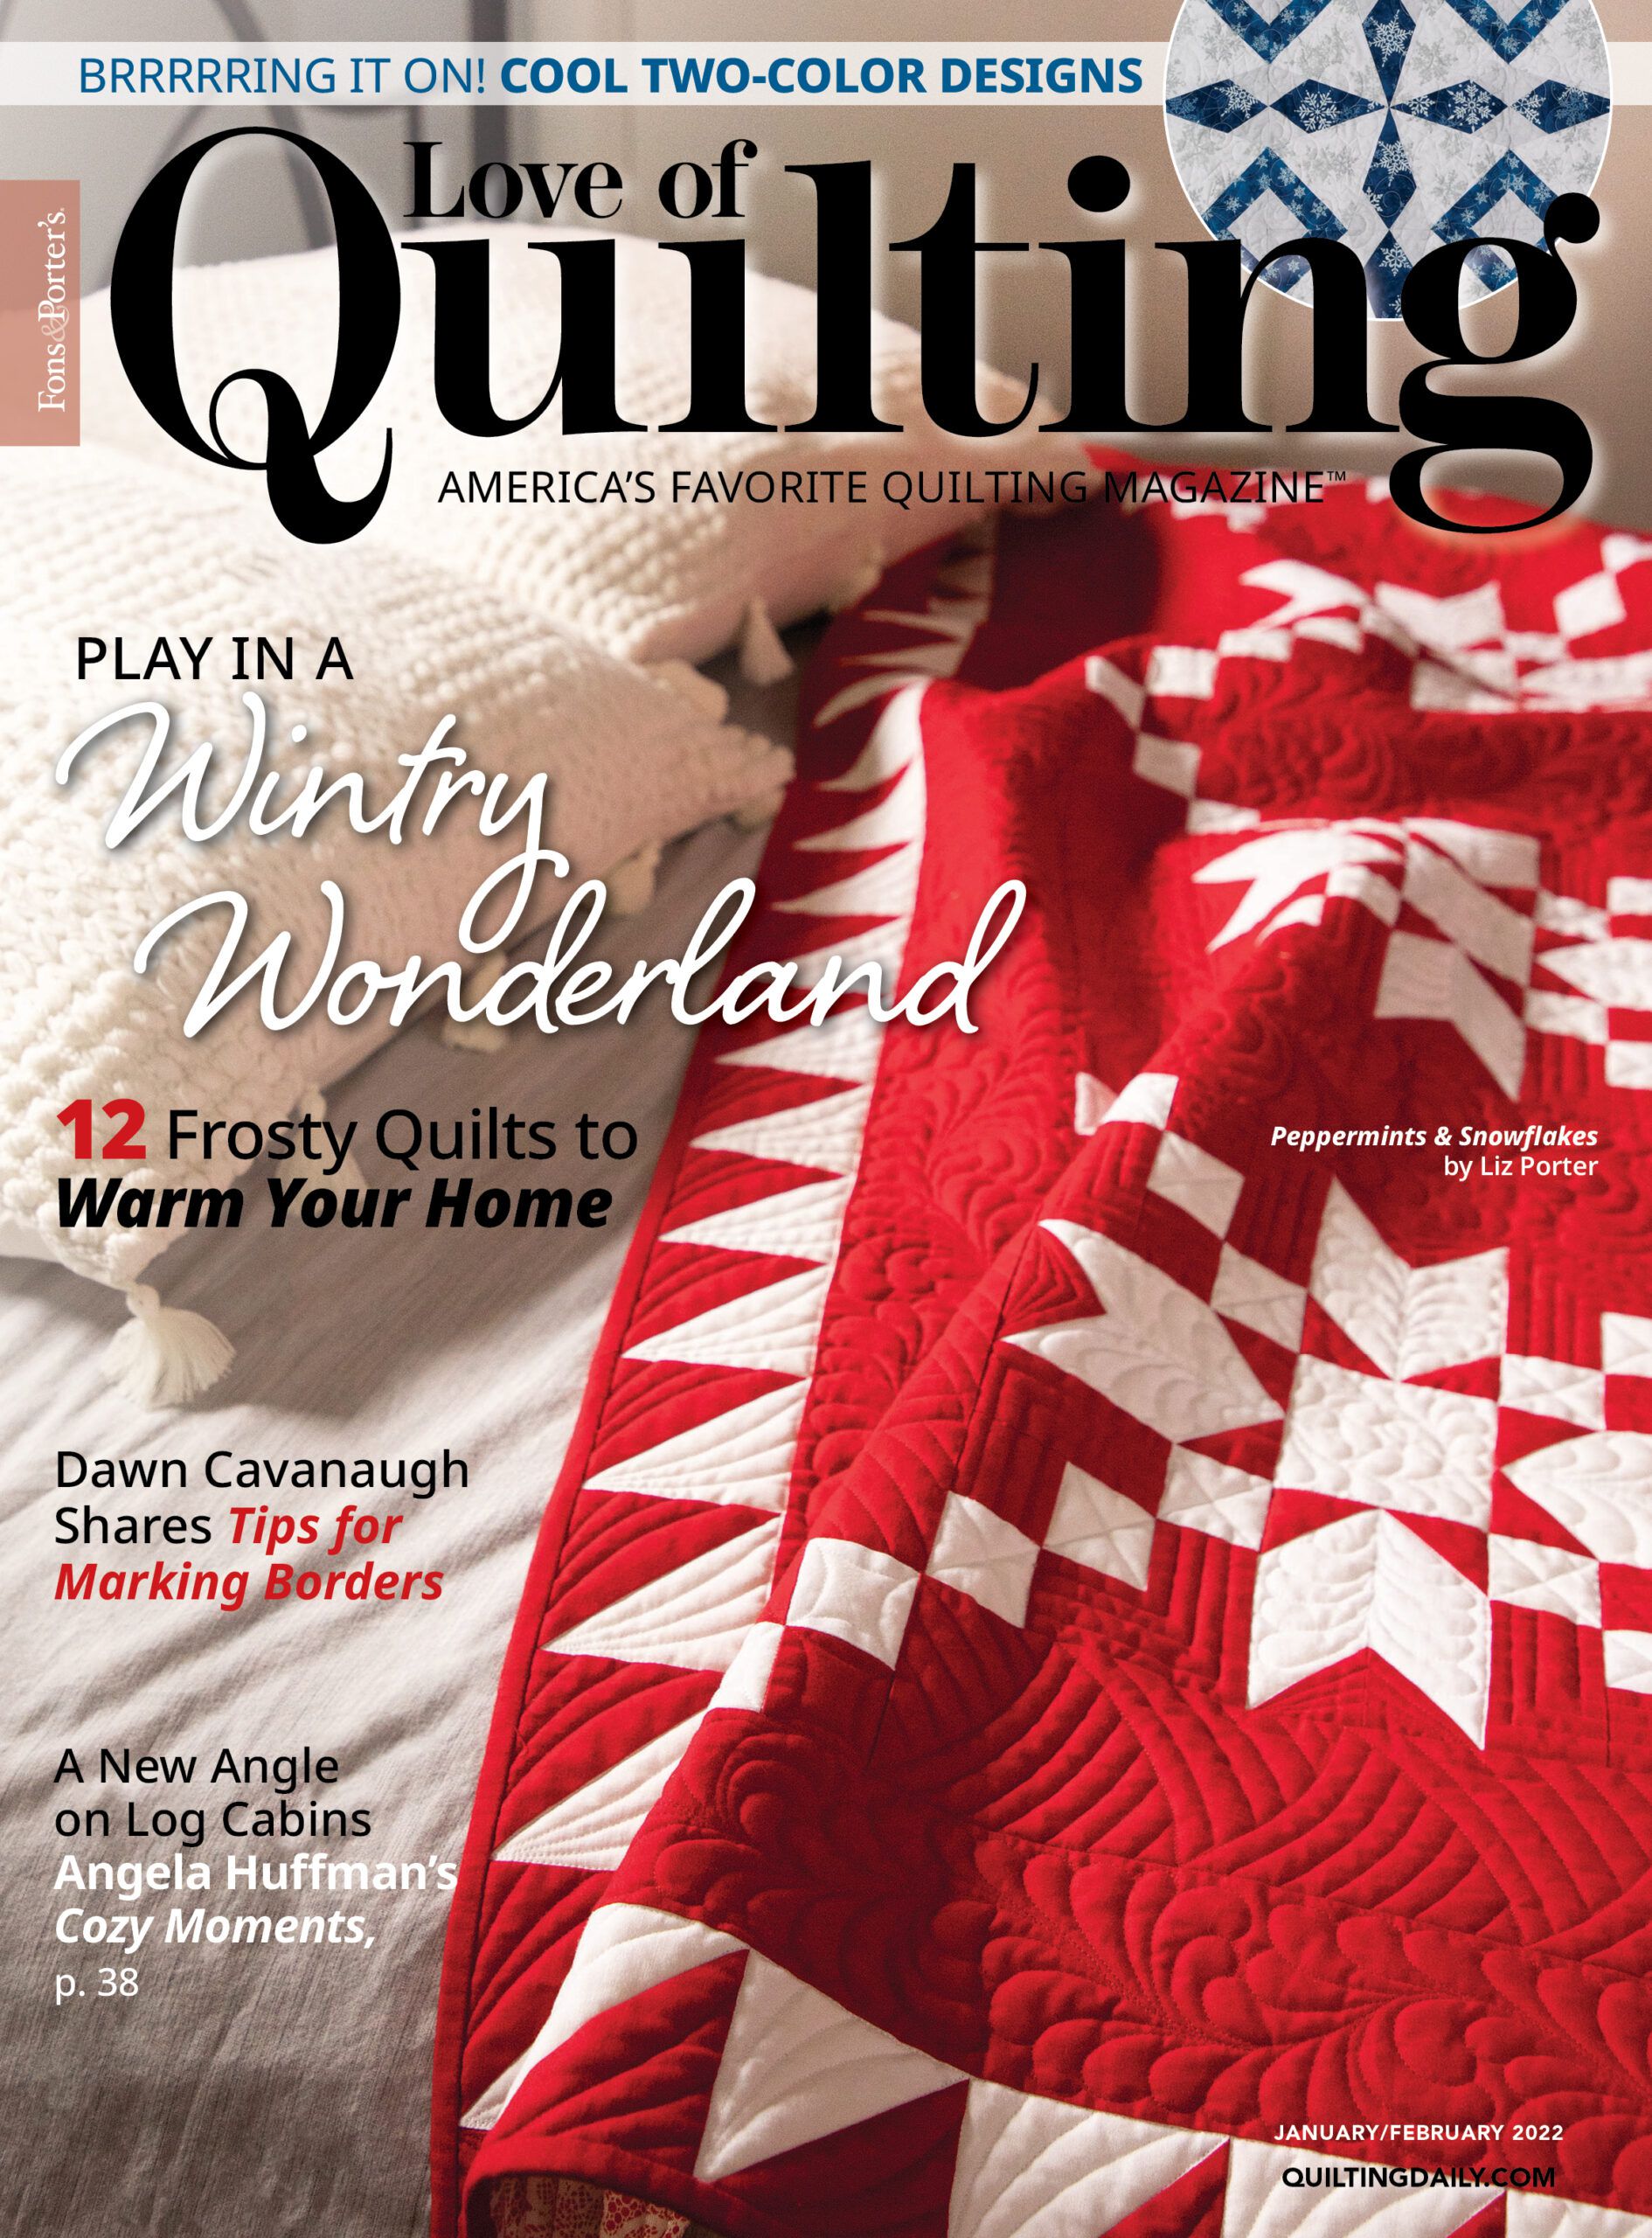 Love of Quilting January/February 2022